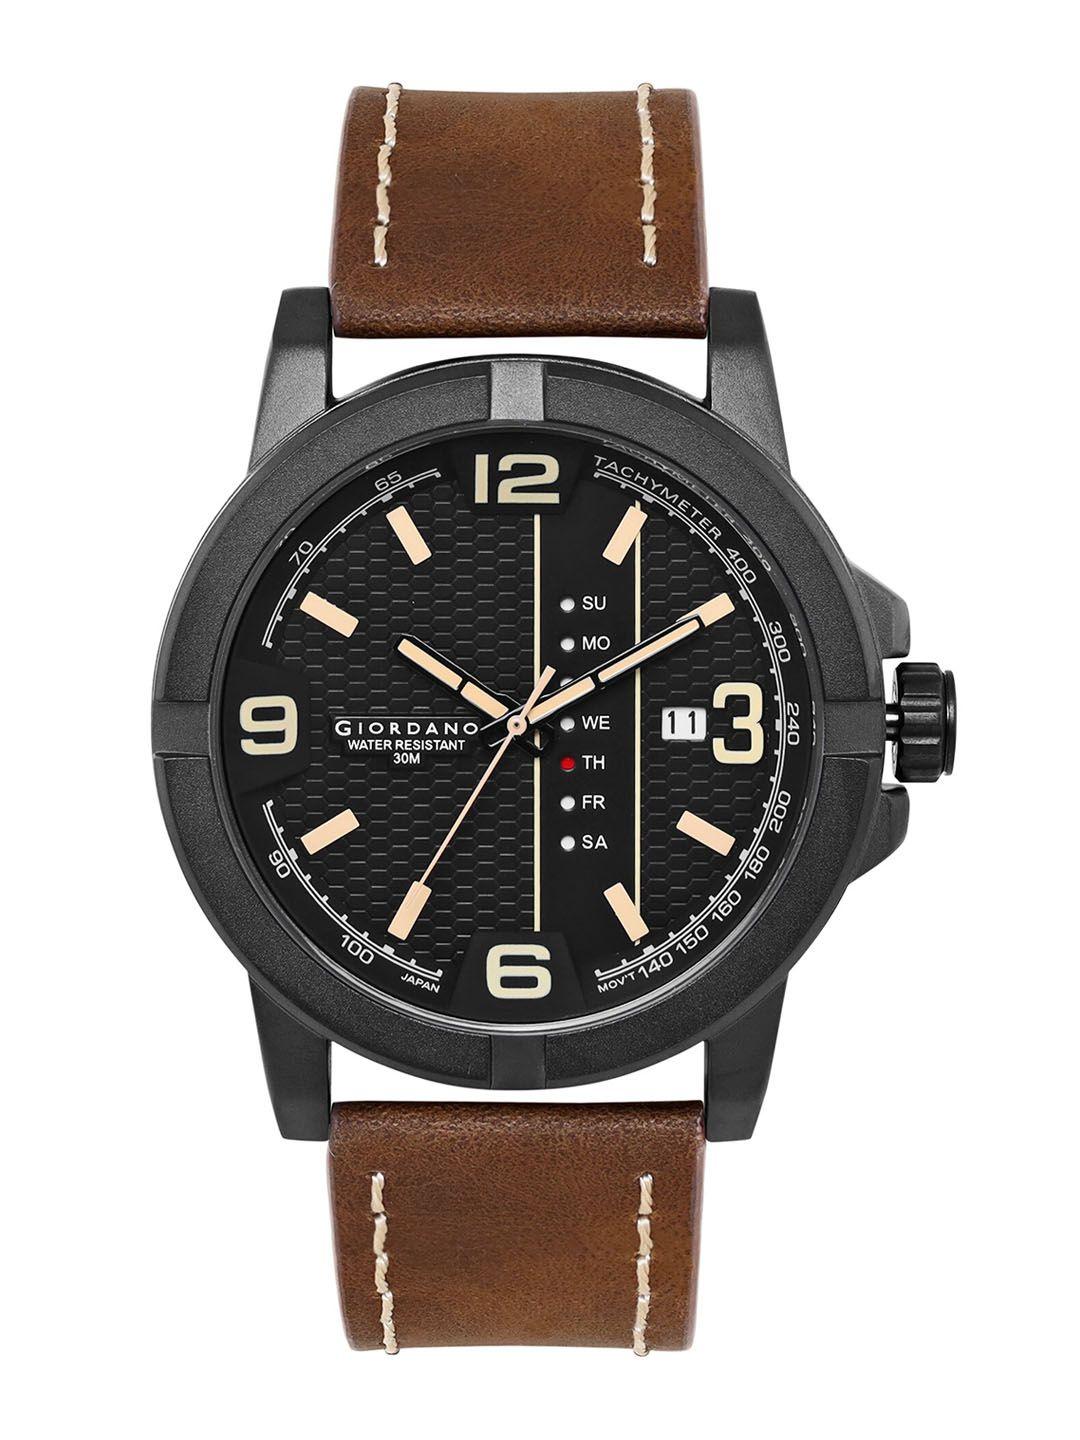 giordano-men-dial-&-leather-straps-analogue-watch-gd-50007-01